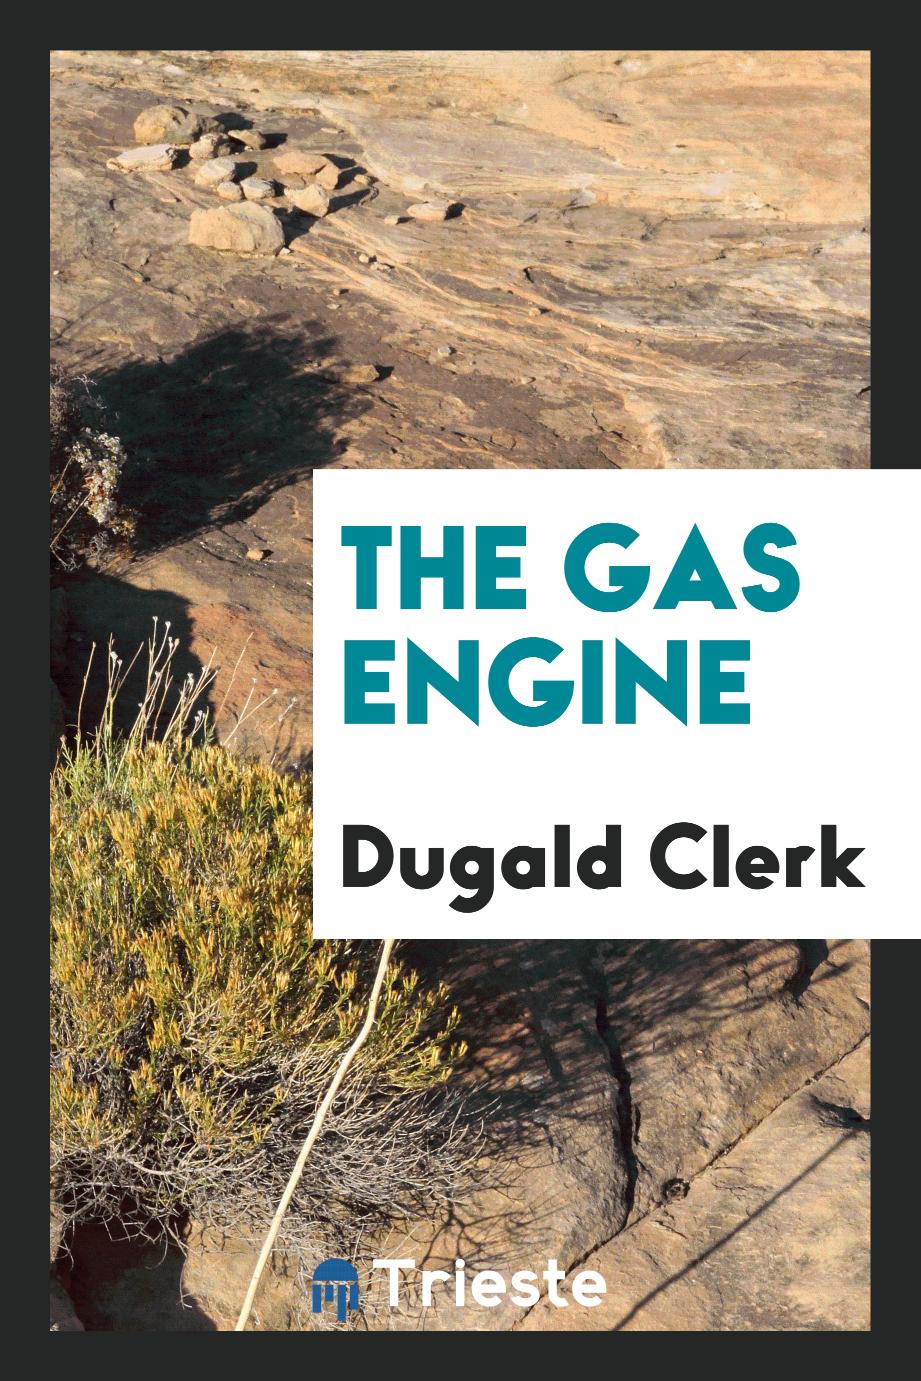 The gas engine